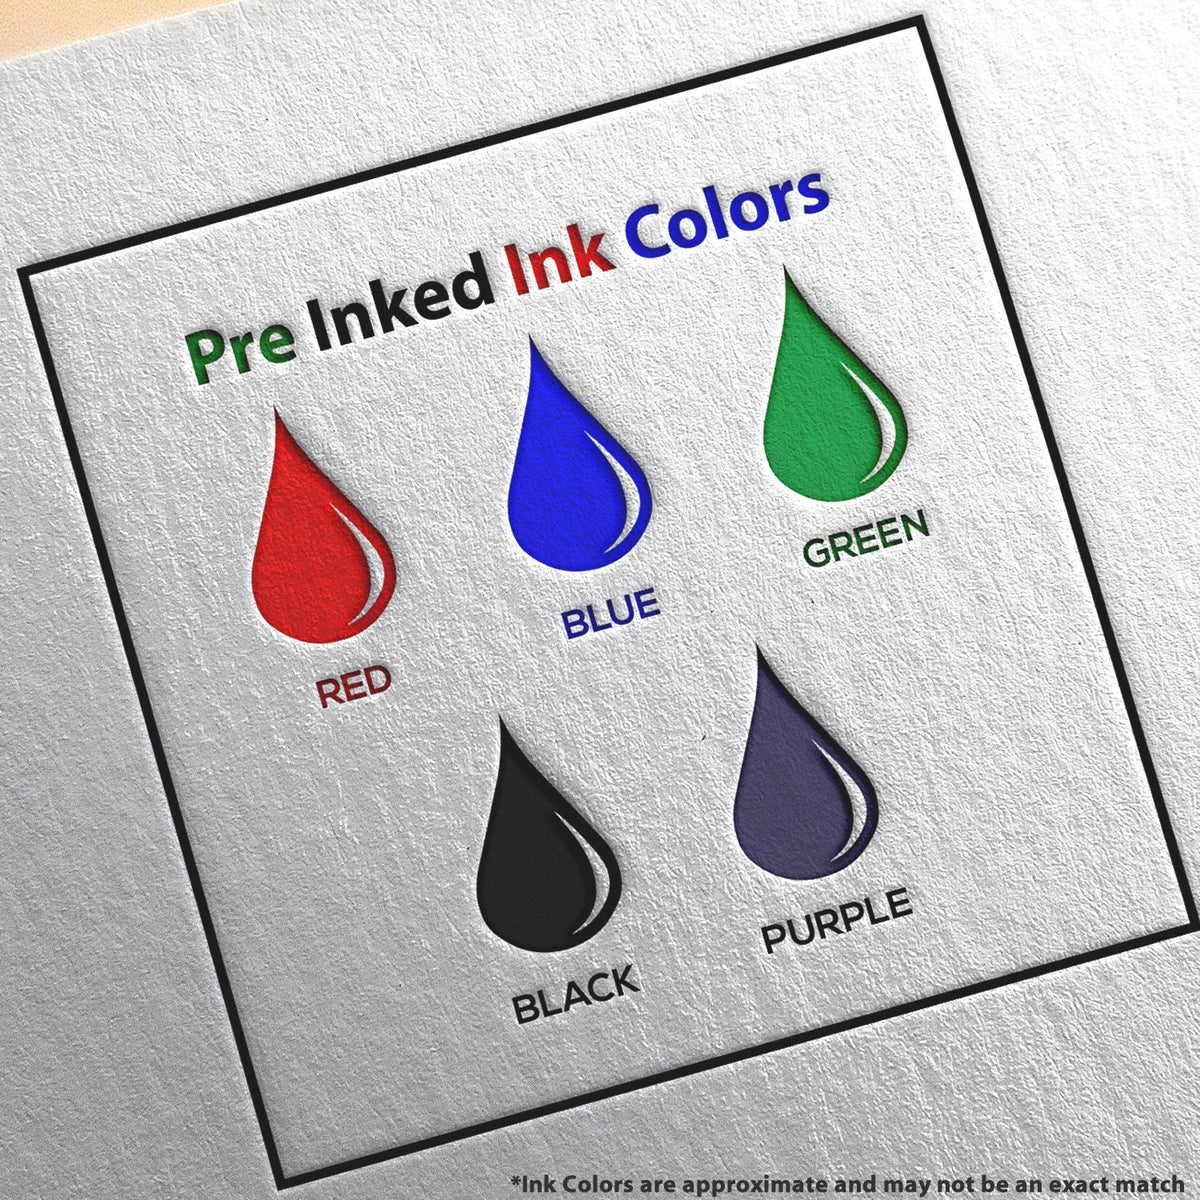 A picture showing the different ink colors or hues available for the MaxLight Premium Pre-Inked Indiana Rectangular Notarial Stamp product.